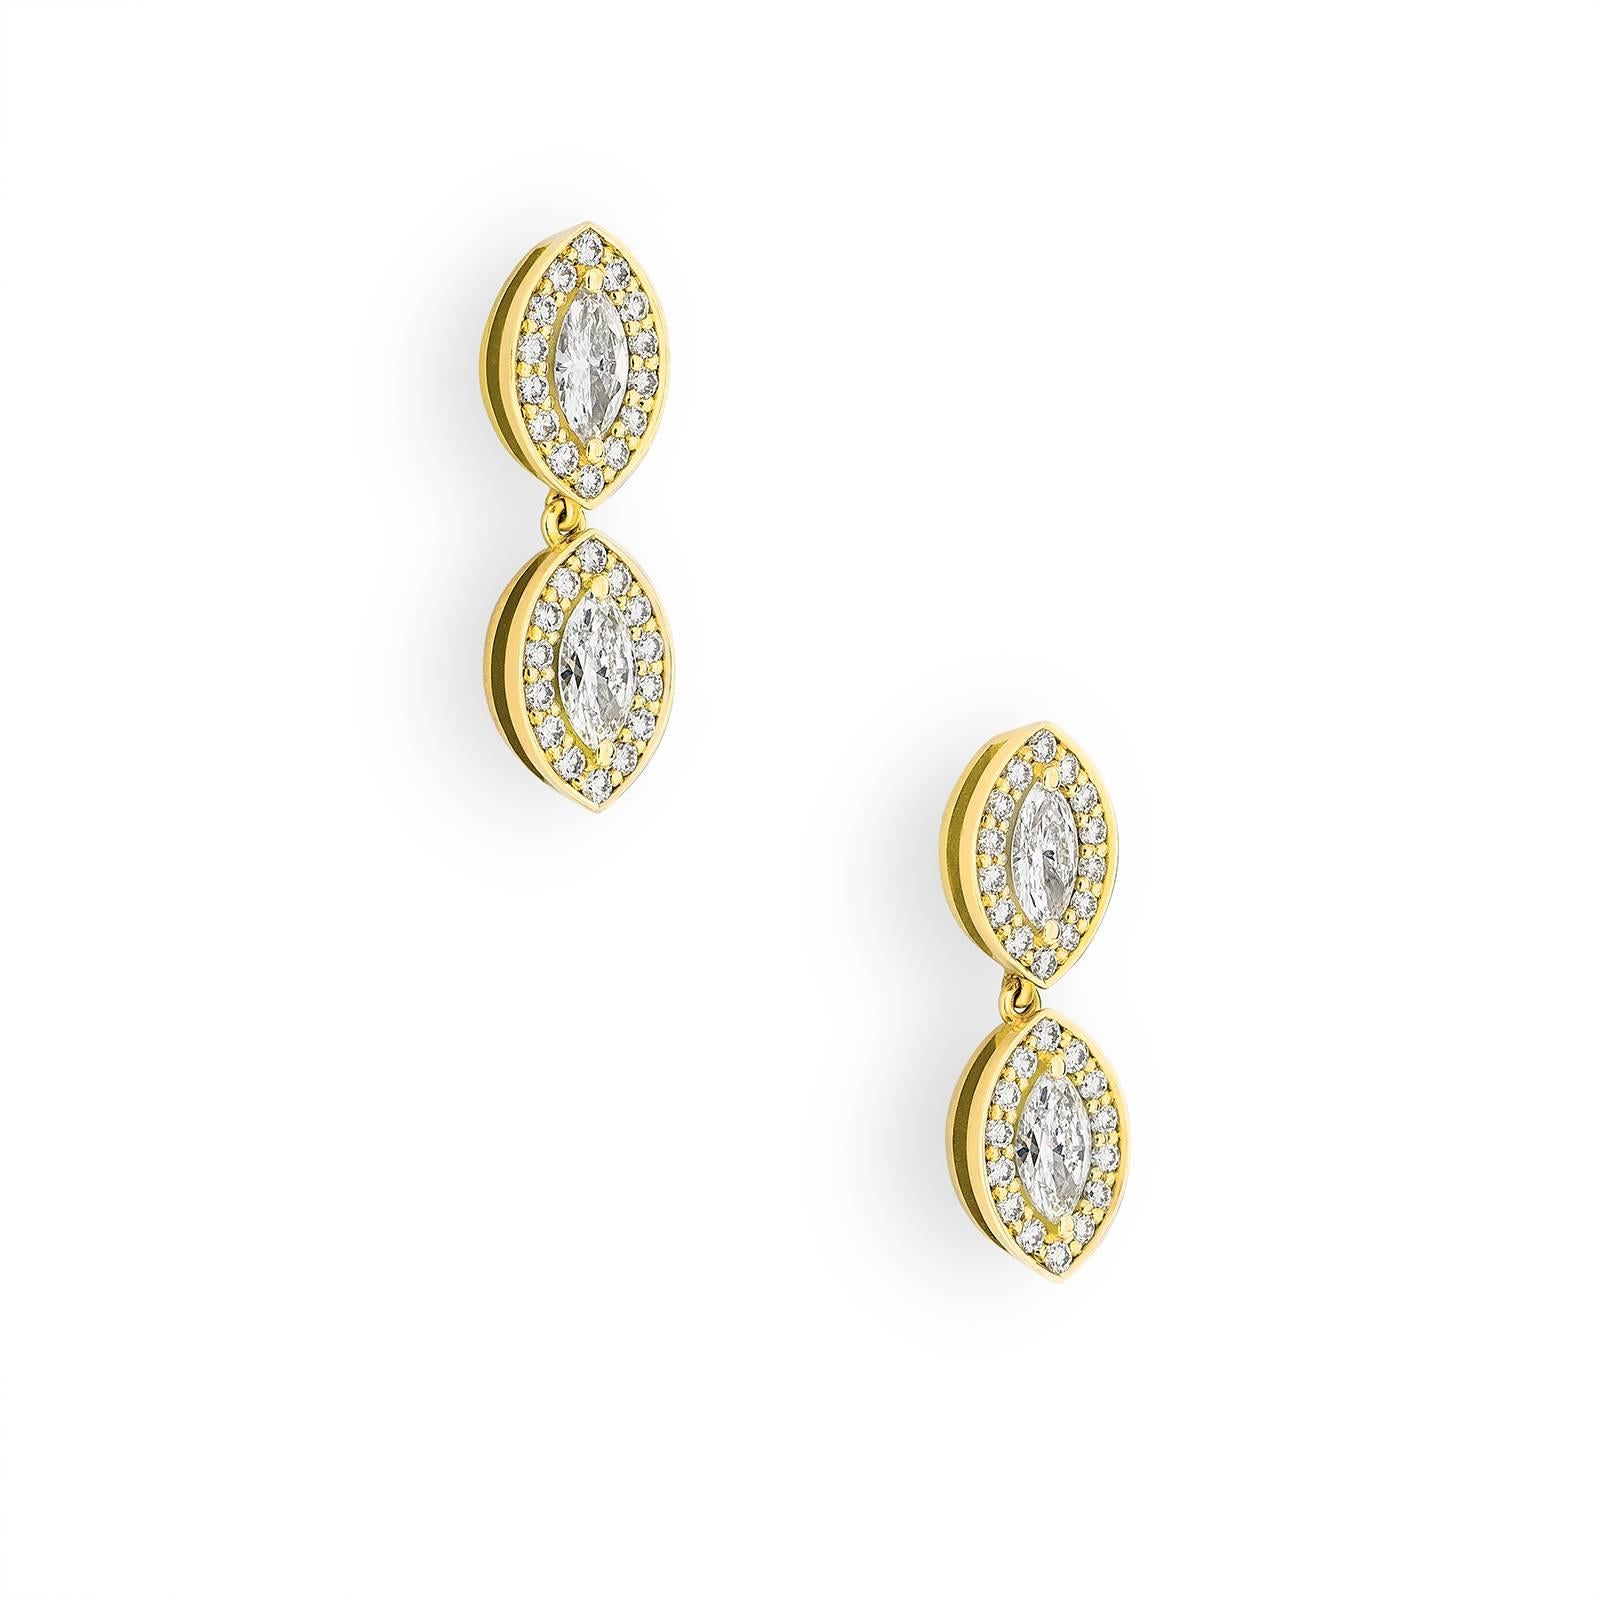 The Empress Drop Earrings are a delicate translation of the fiery Empress Earrings. By suspending two glittering 0.8 tct natural marquise cut diamonds, encircling each with 0.14 tct natural pavé-set diamonds and setting in 18k Fairtrade gold, they